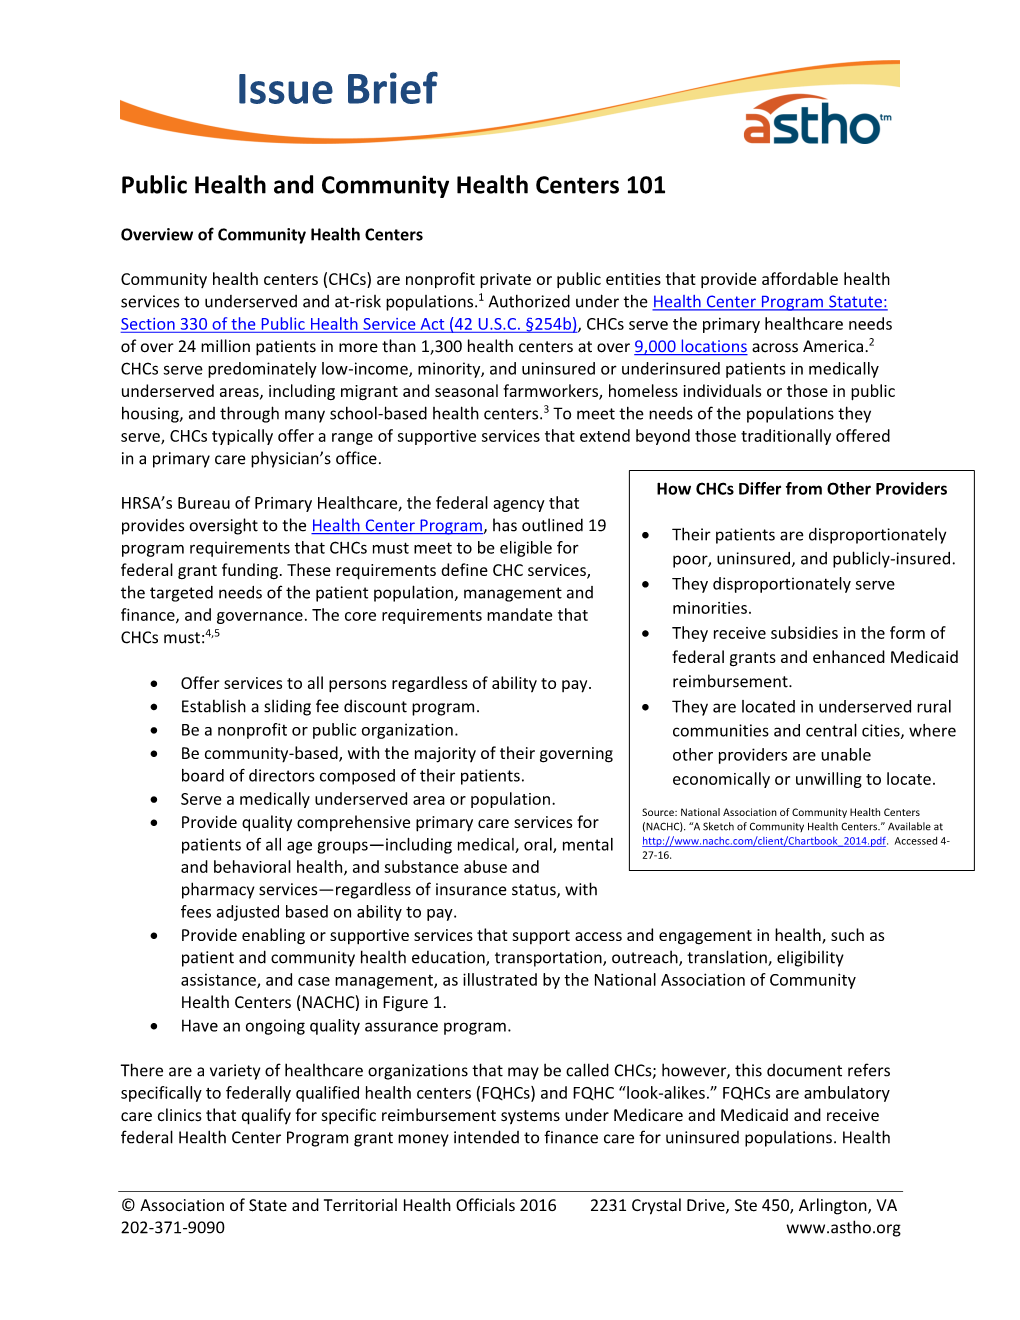 ASTHO Issue Brief on Public Health and Community Health Centers